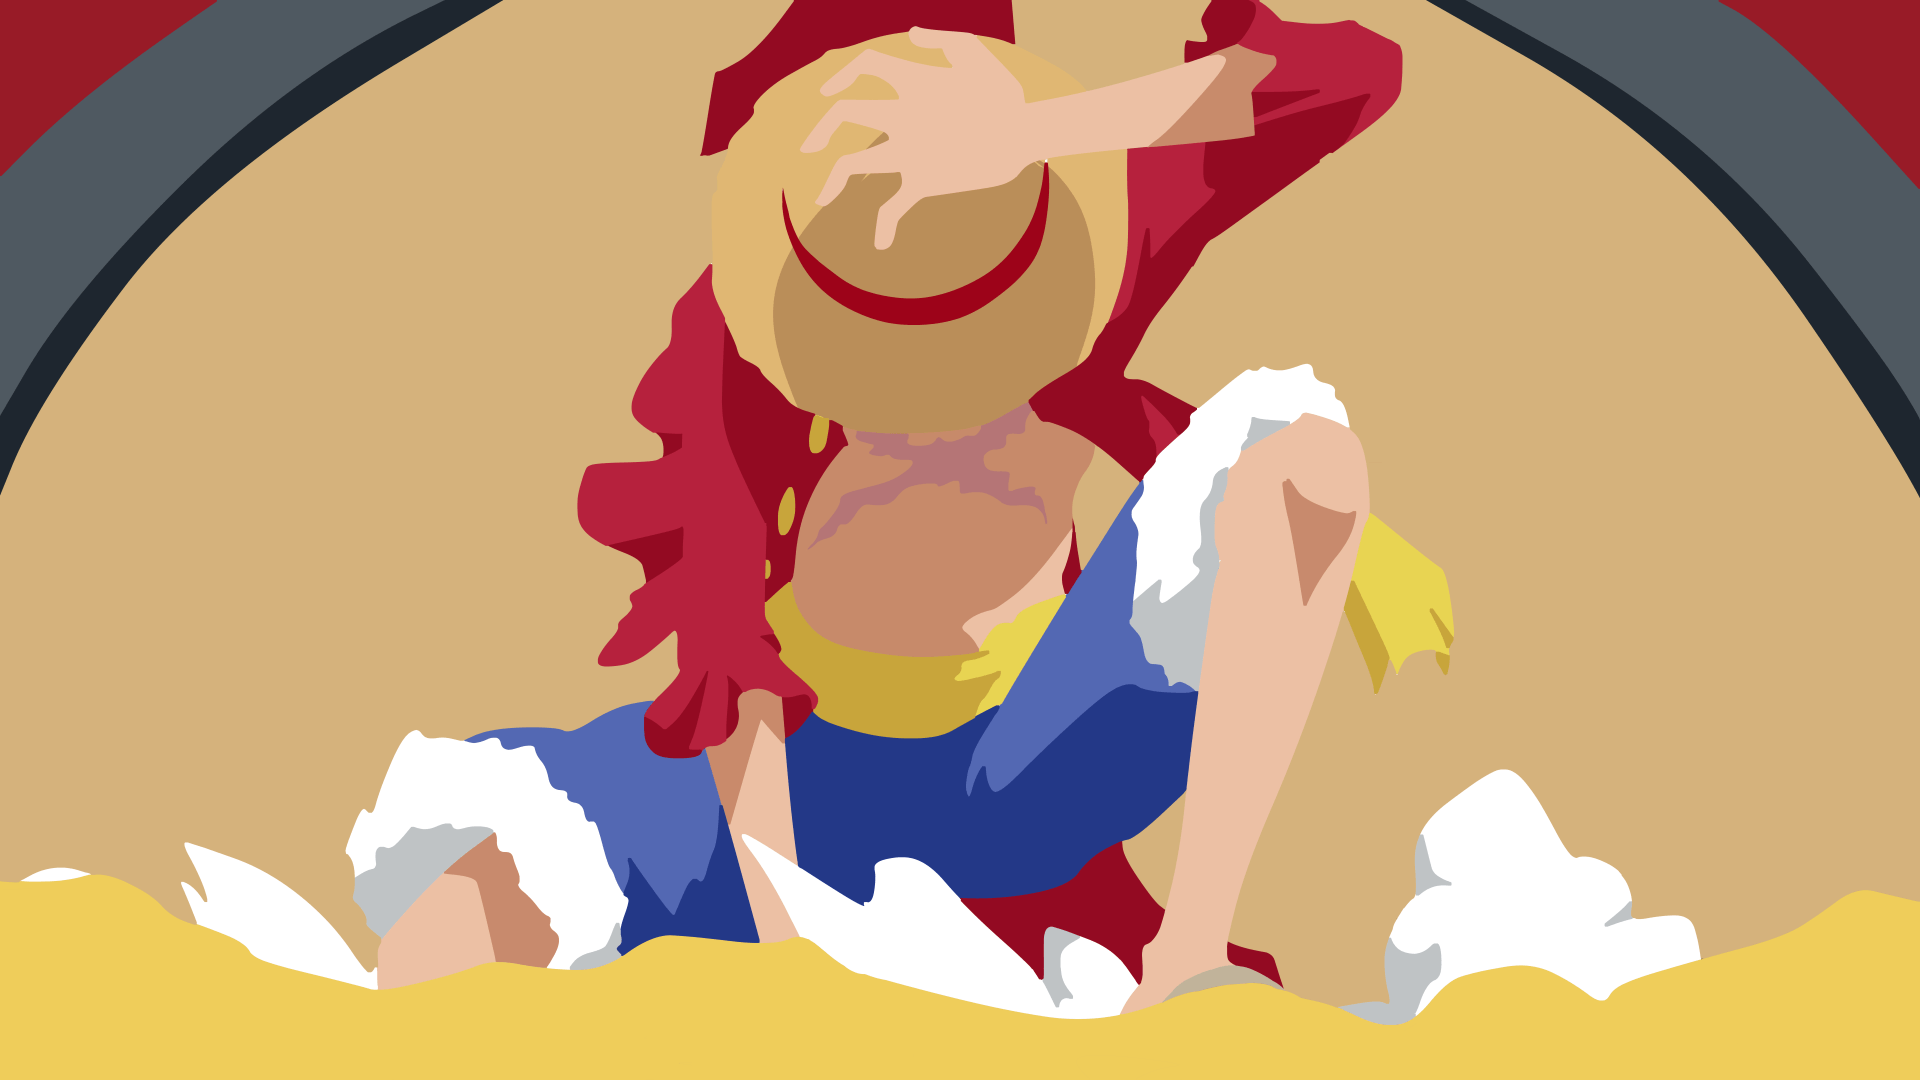 One Piece Minimalist Wallpapers - Wallpaper Cave